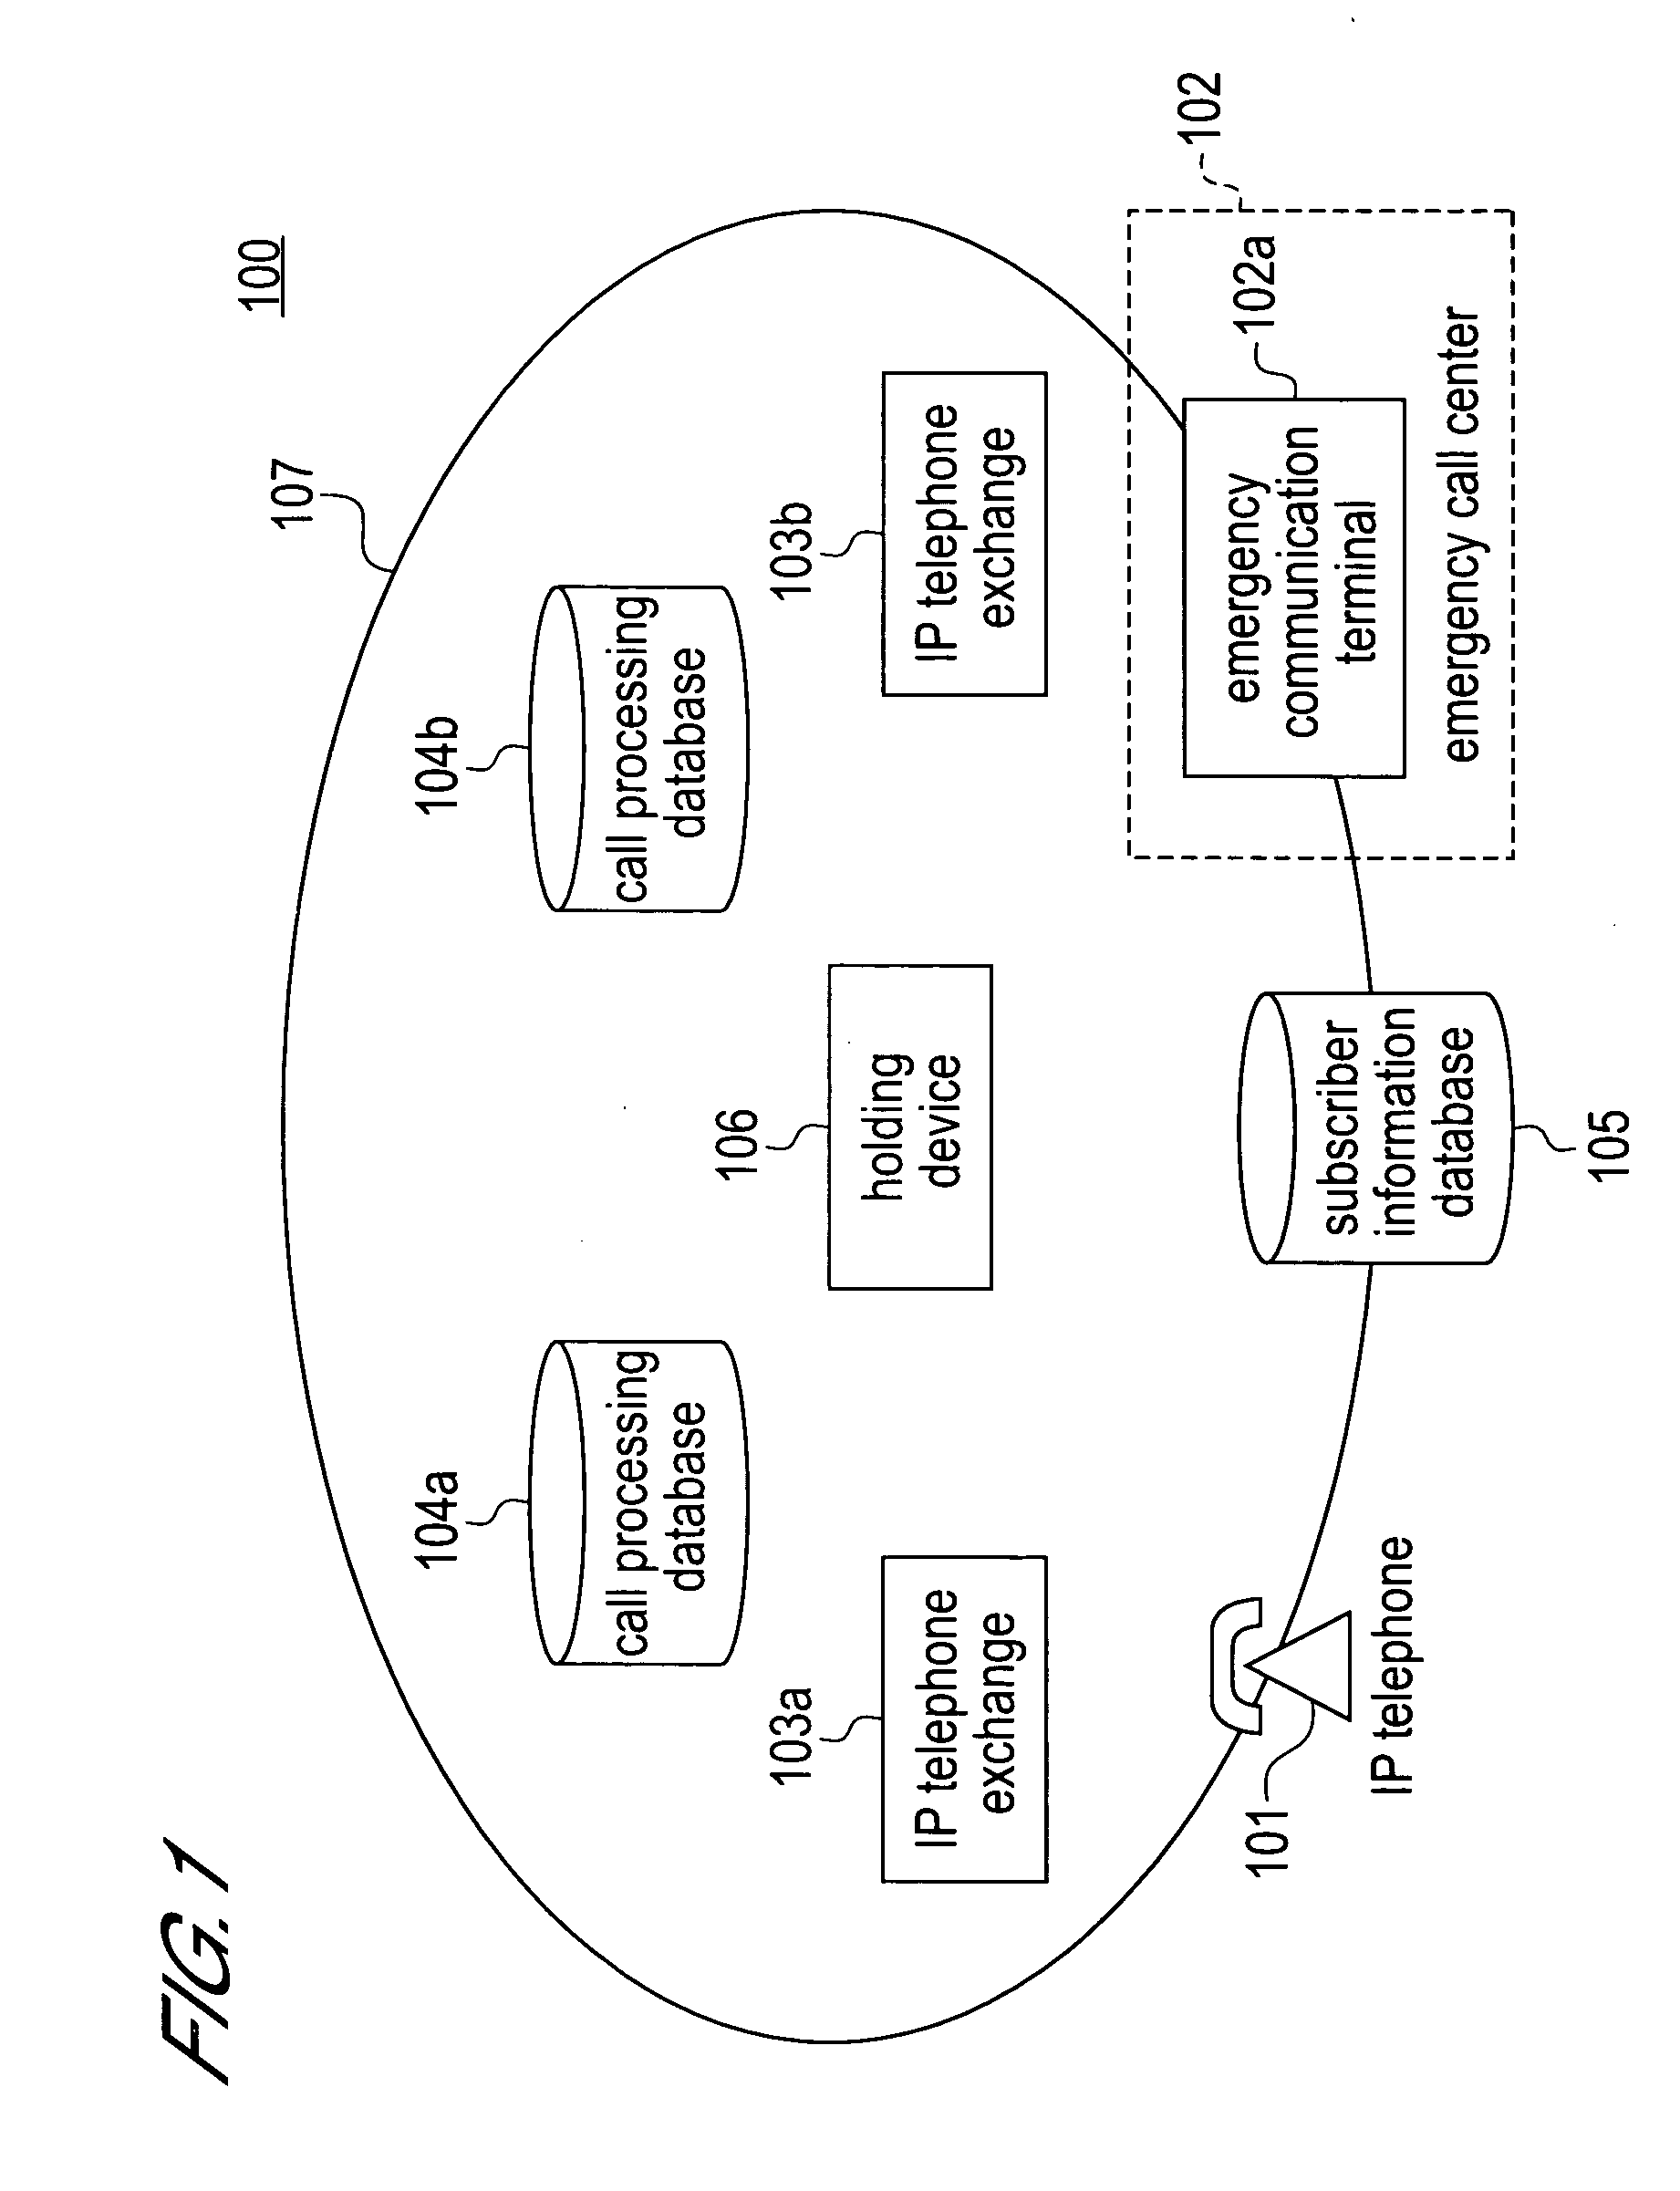 IP telephone system having a hold function and a callback function